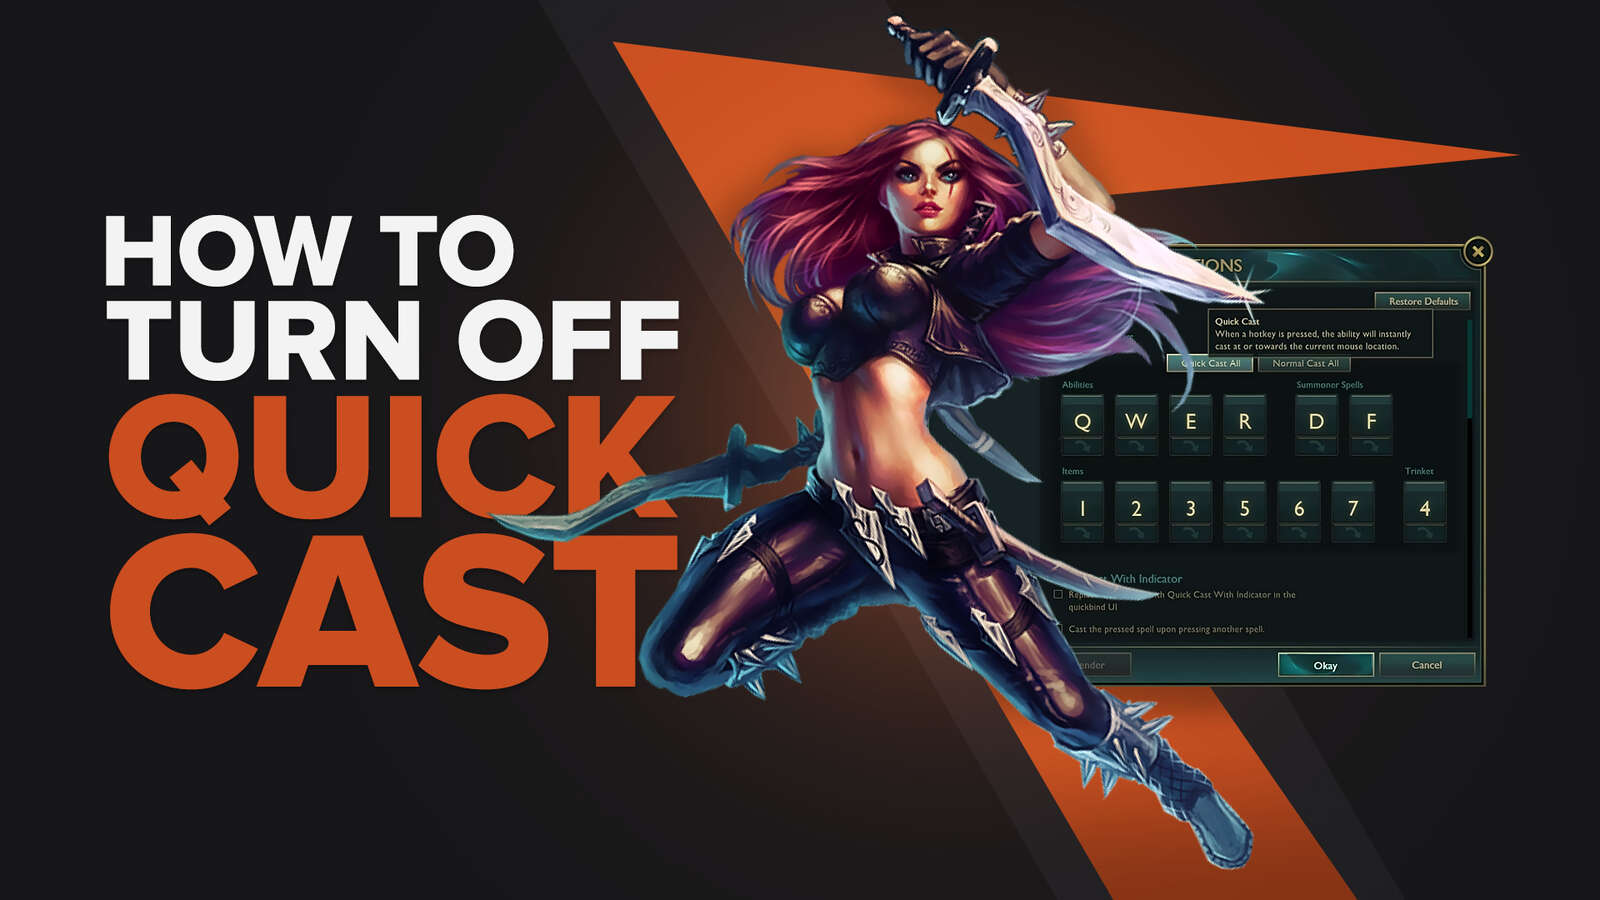 Here's How To Easily Turn Off Quick Cast in LoL